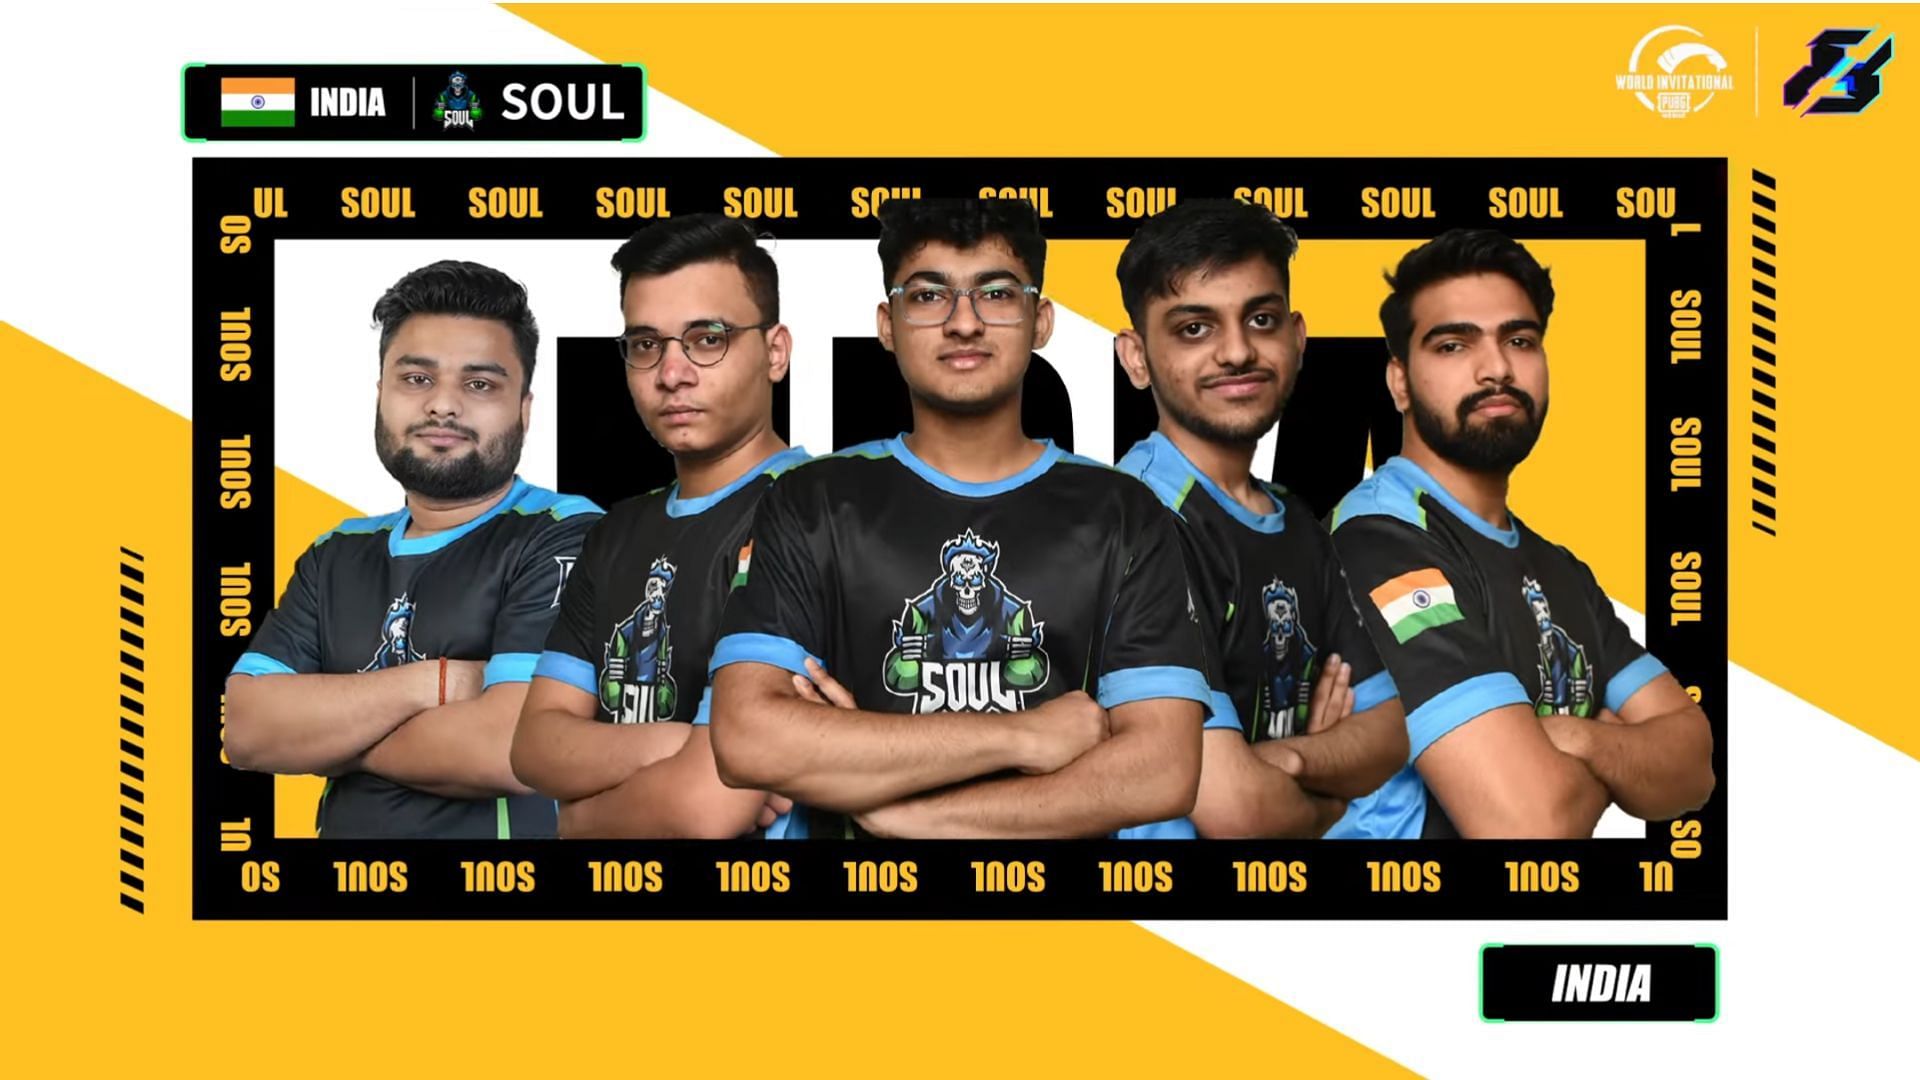 Tencent unveiled Team Soul roster for PMWI 2022 (Image via PUBG Mobile Esports YouTube)